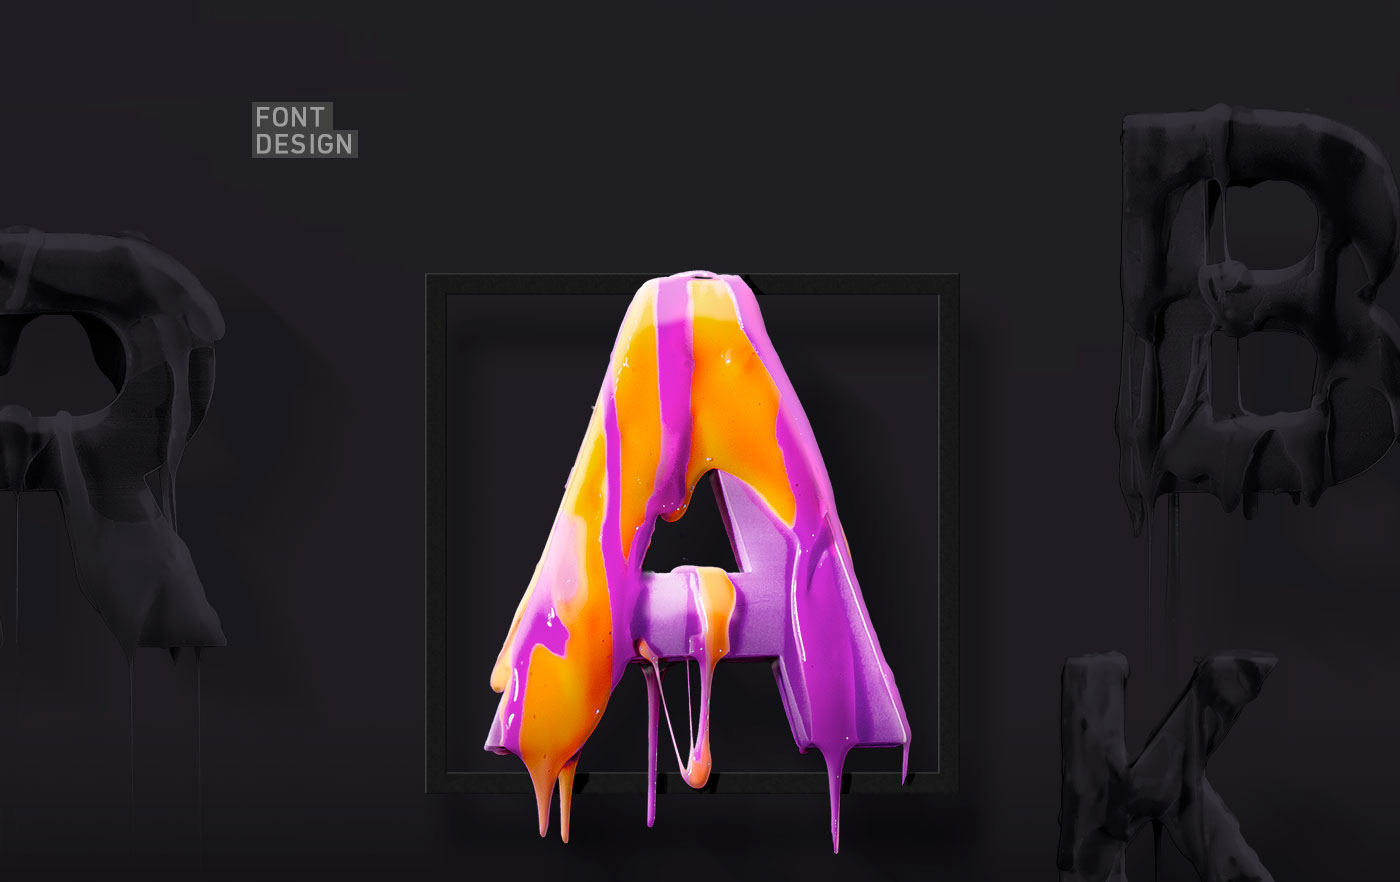 bron the weeknd disc music ILLUSTRATION  Web Design  Creative Direction  can